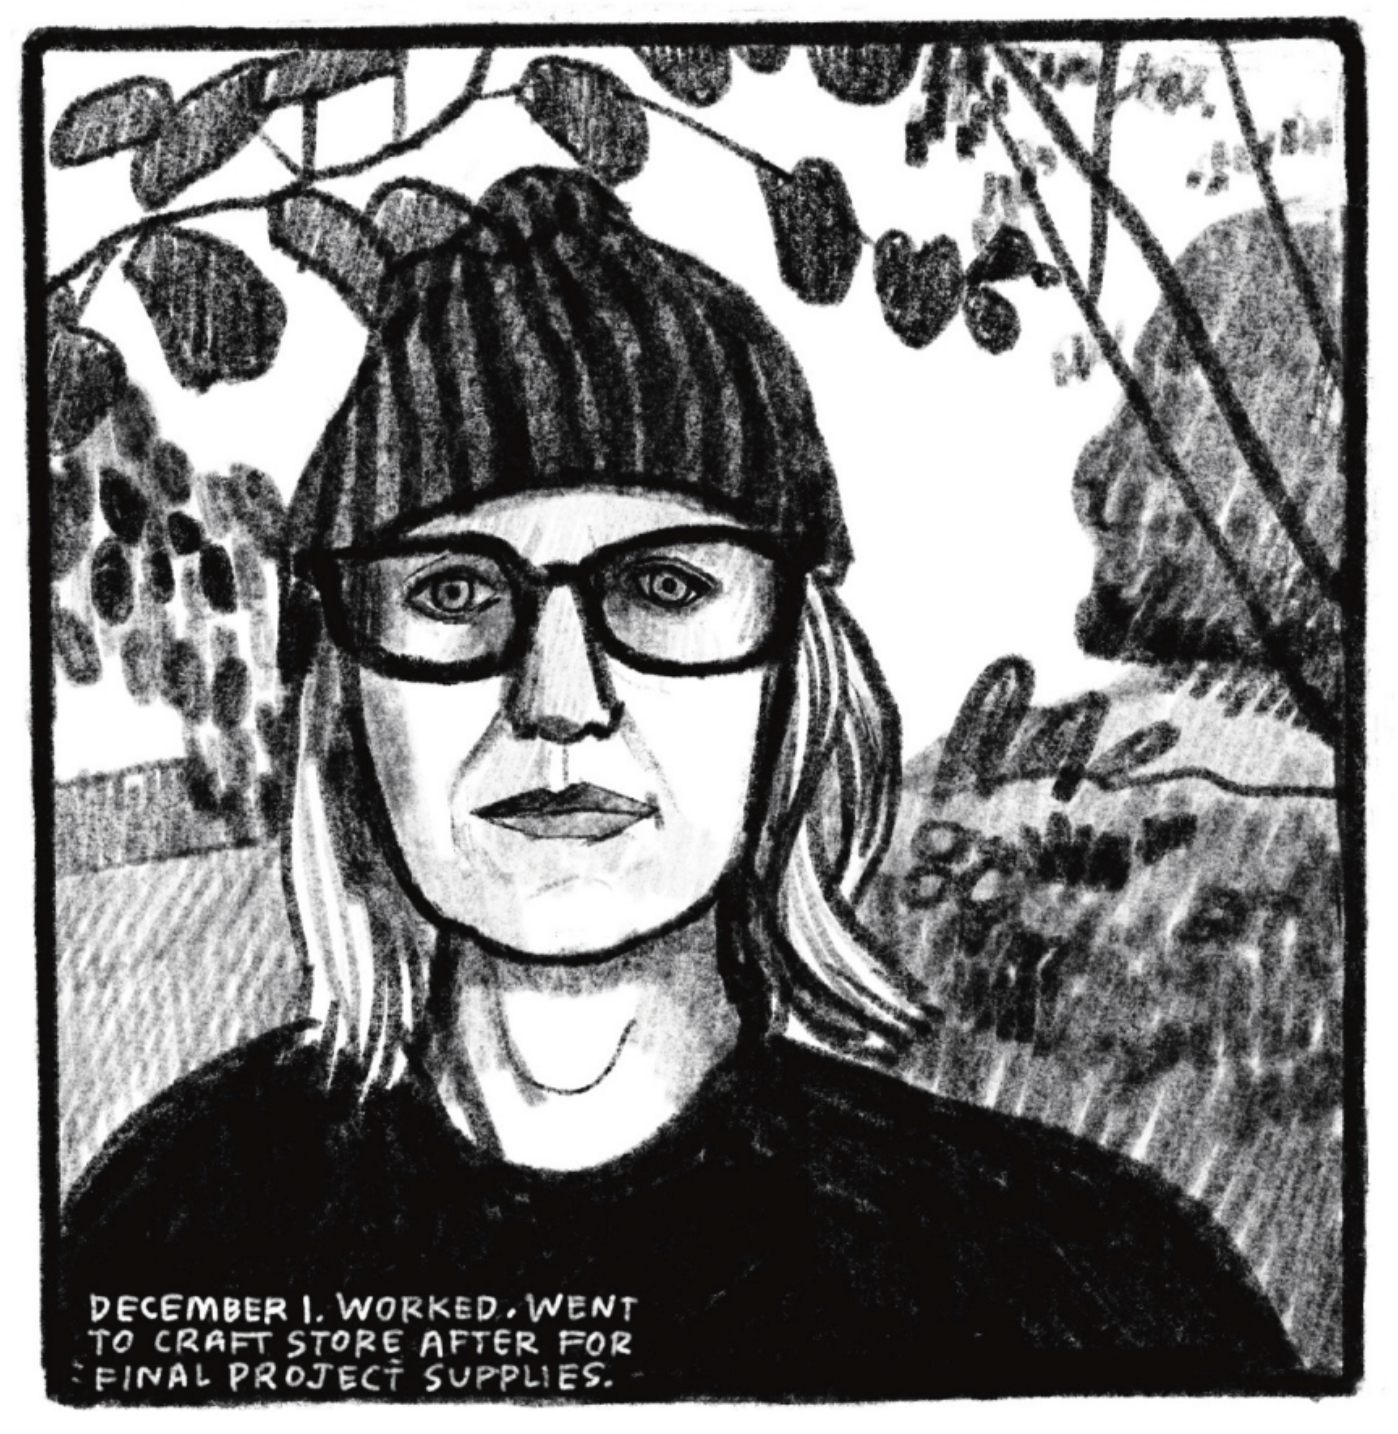 A close-up portrait of Kim from head to shoulders. She is wearing a dark beanie, chunky-framed glasses, and a dark long-sleeve shirt. Her hair is down and falling around her shoulders. She looks directly at the reader with a neutral expression. In the background are leaves and branches and bushes further back. â€œDecember 1. Worked. Went to craft store after for final project supplies.â€